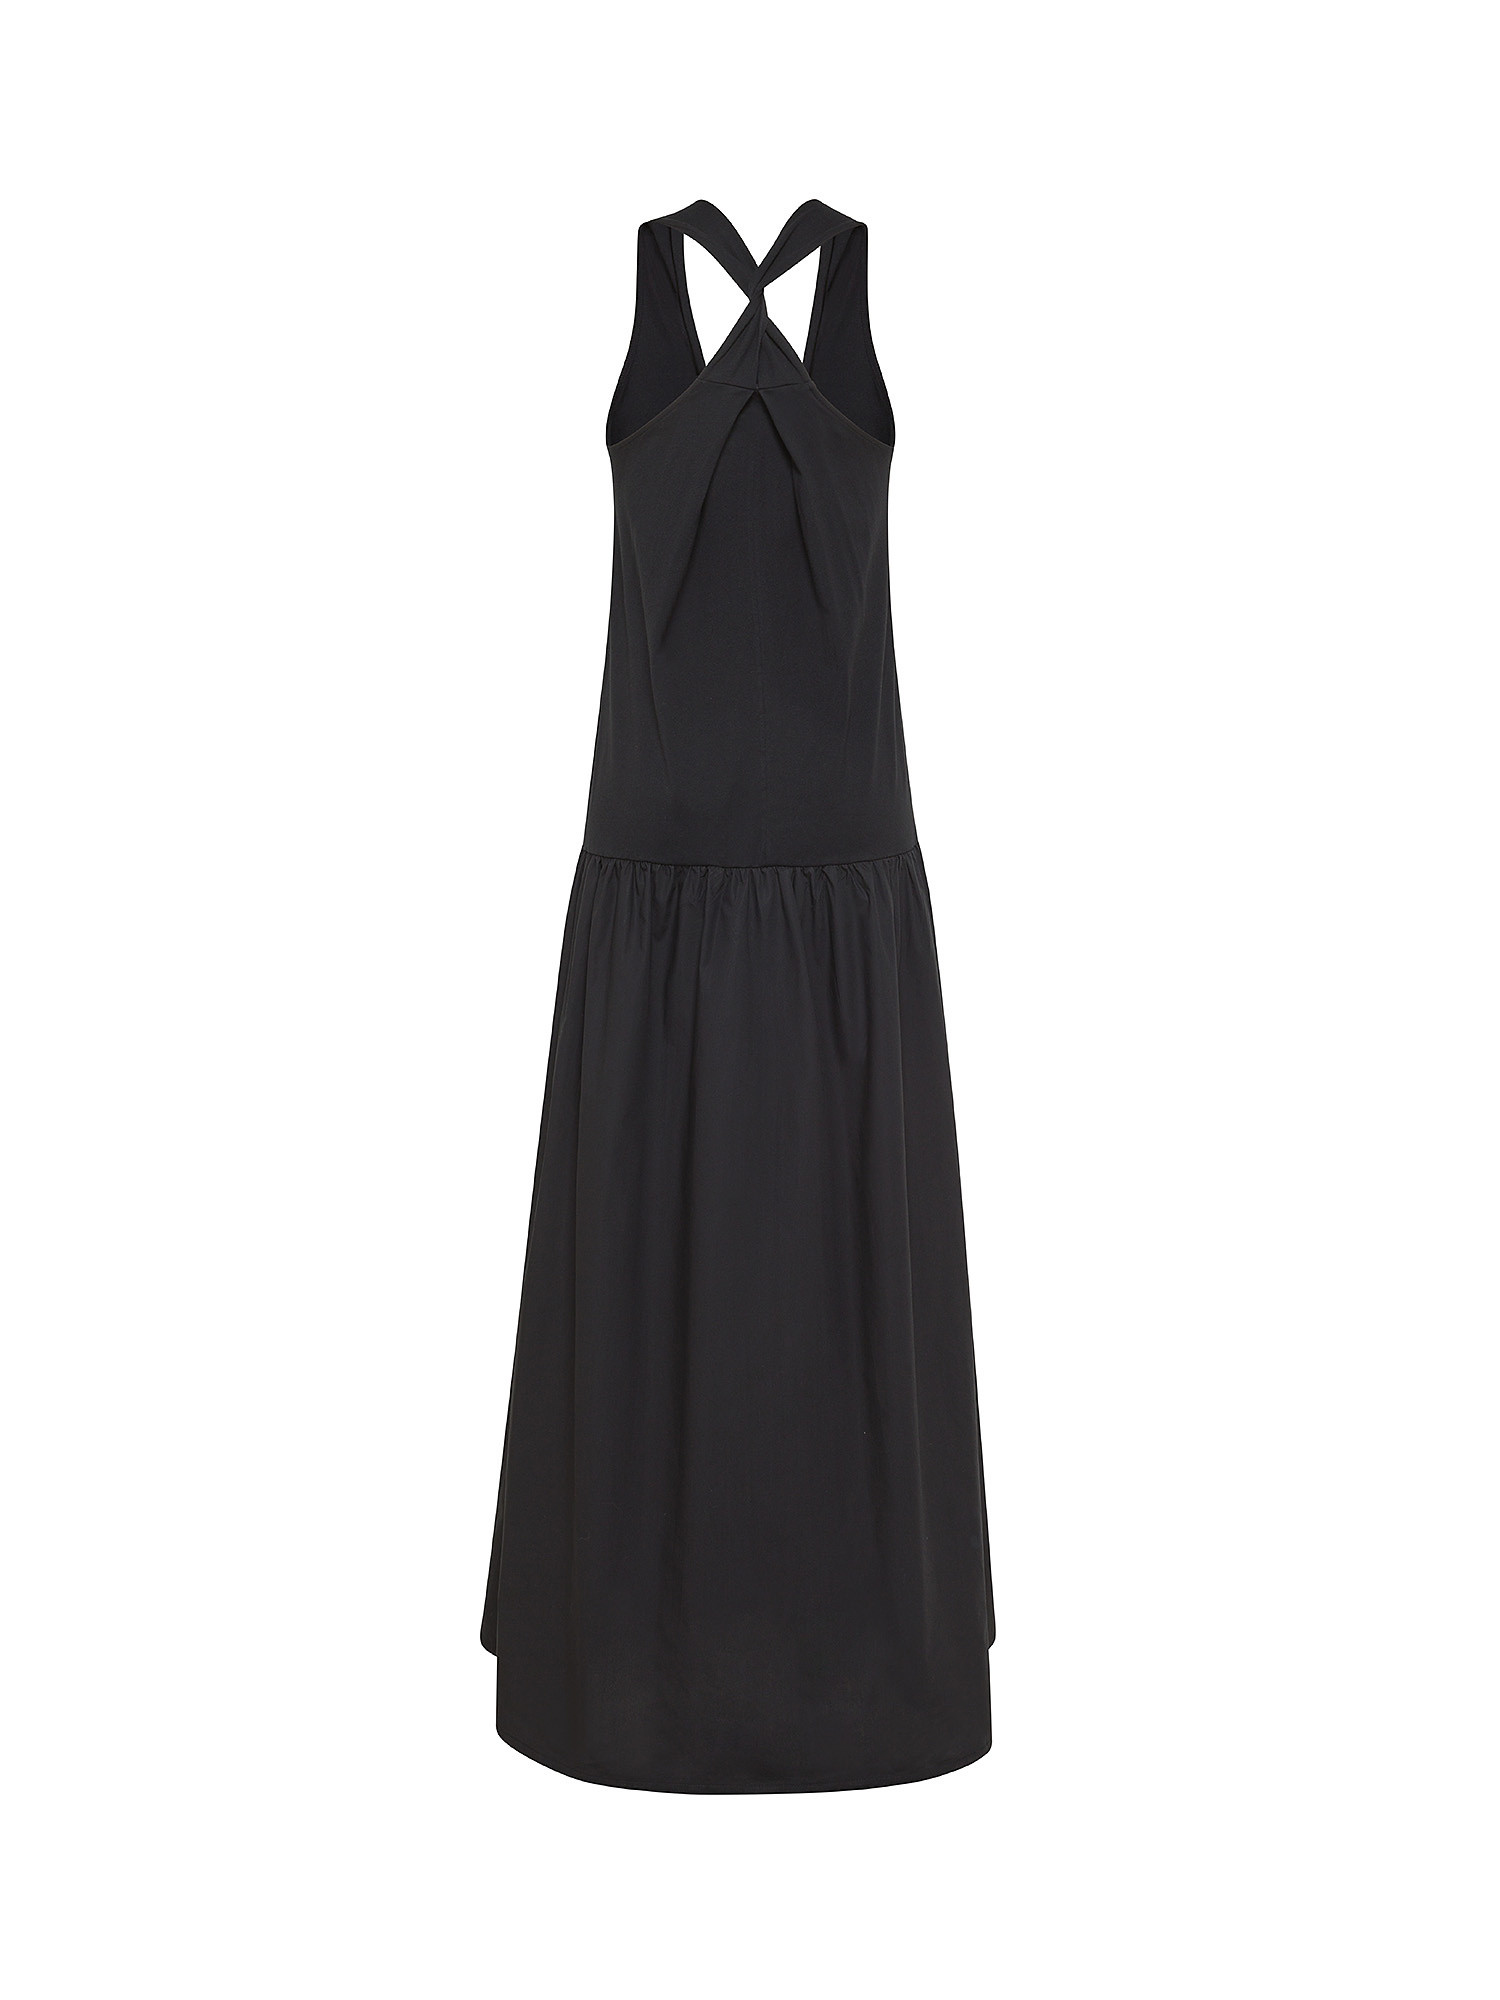 Attic and Barn - Dallas dress in cotton, Black, large image number 1